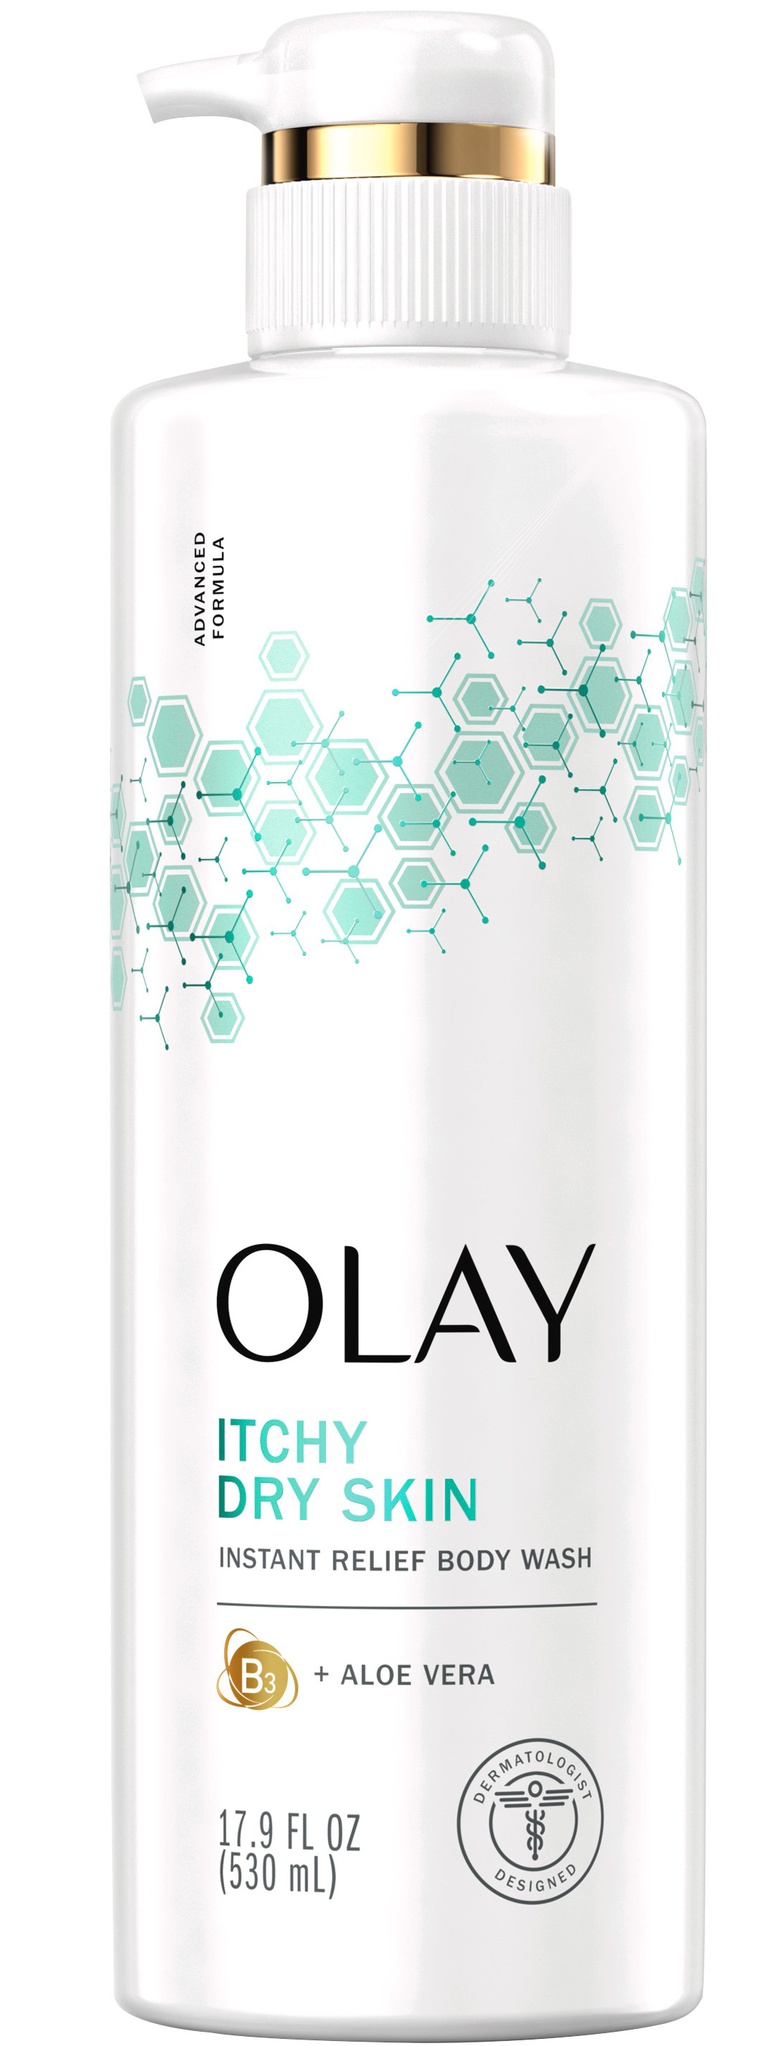 Olay Itchy Dry Skin Instant Relief Body Wash